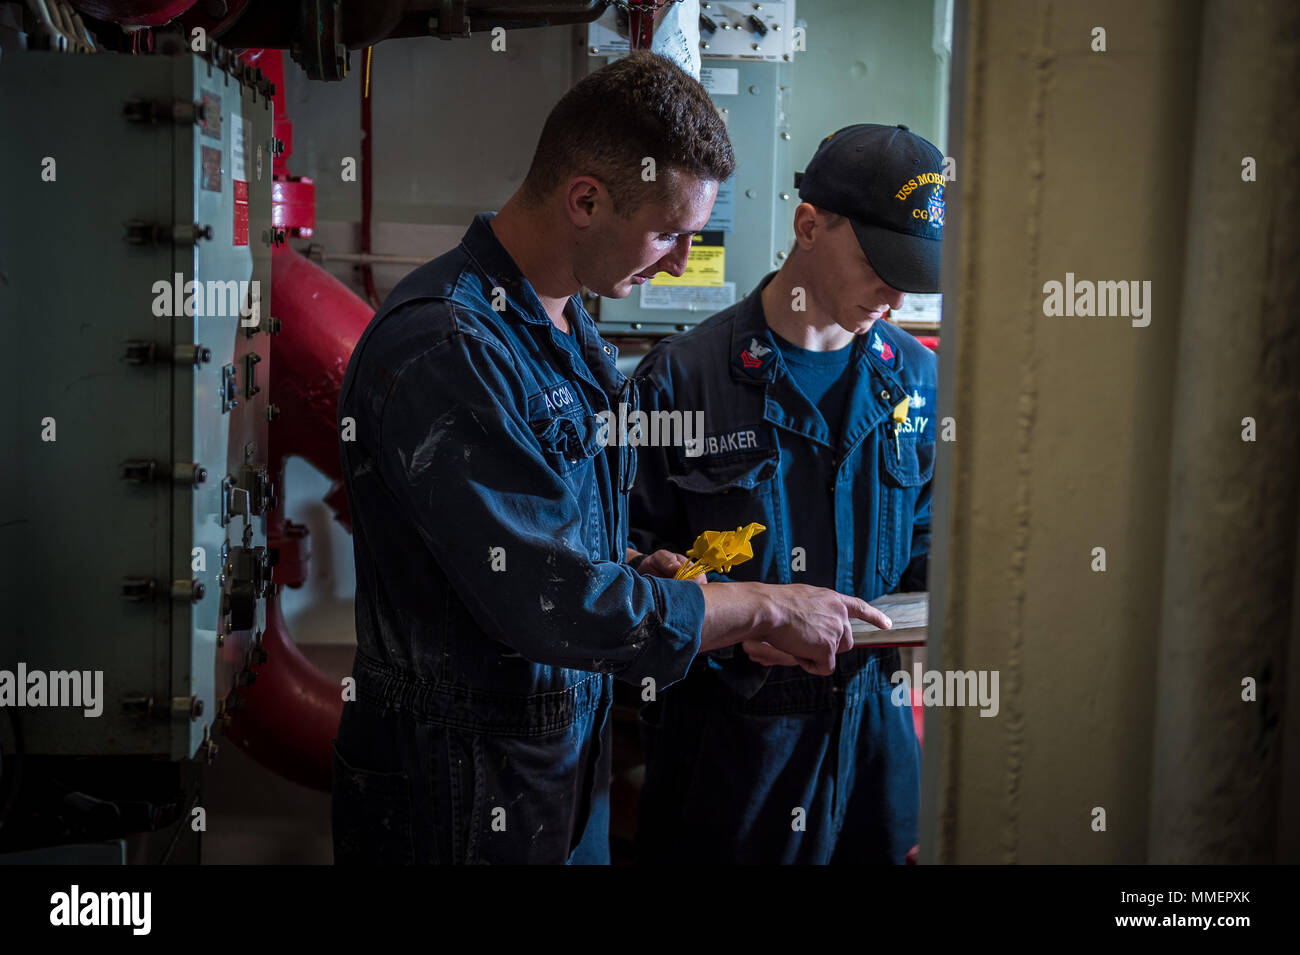 171021-N-KT595-043 PACIFIC OCEAN (Oct. 21, 2017) Damage Controlman 1st Class Gabriel Brubaker and Fireman Braden Braccio, assigned to the guided-missile cruiser USS Mobile Bay (CG 53), perform a daily inspection on the ships damage control equipment. Mobile Bay is currently underway testing an AEGIS Baseline 9 upgrade to its Baseline 8 combat system in preparation for its upcoming deployment. (U.S Navy Photo by Mass Communication Specialist 1st Class Chad M. Butler/Released) Stock Photo